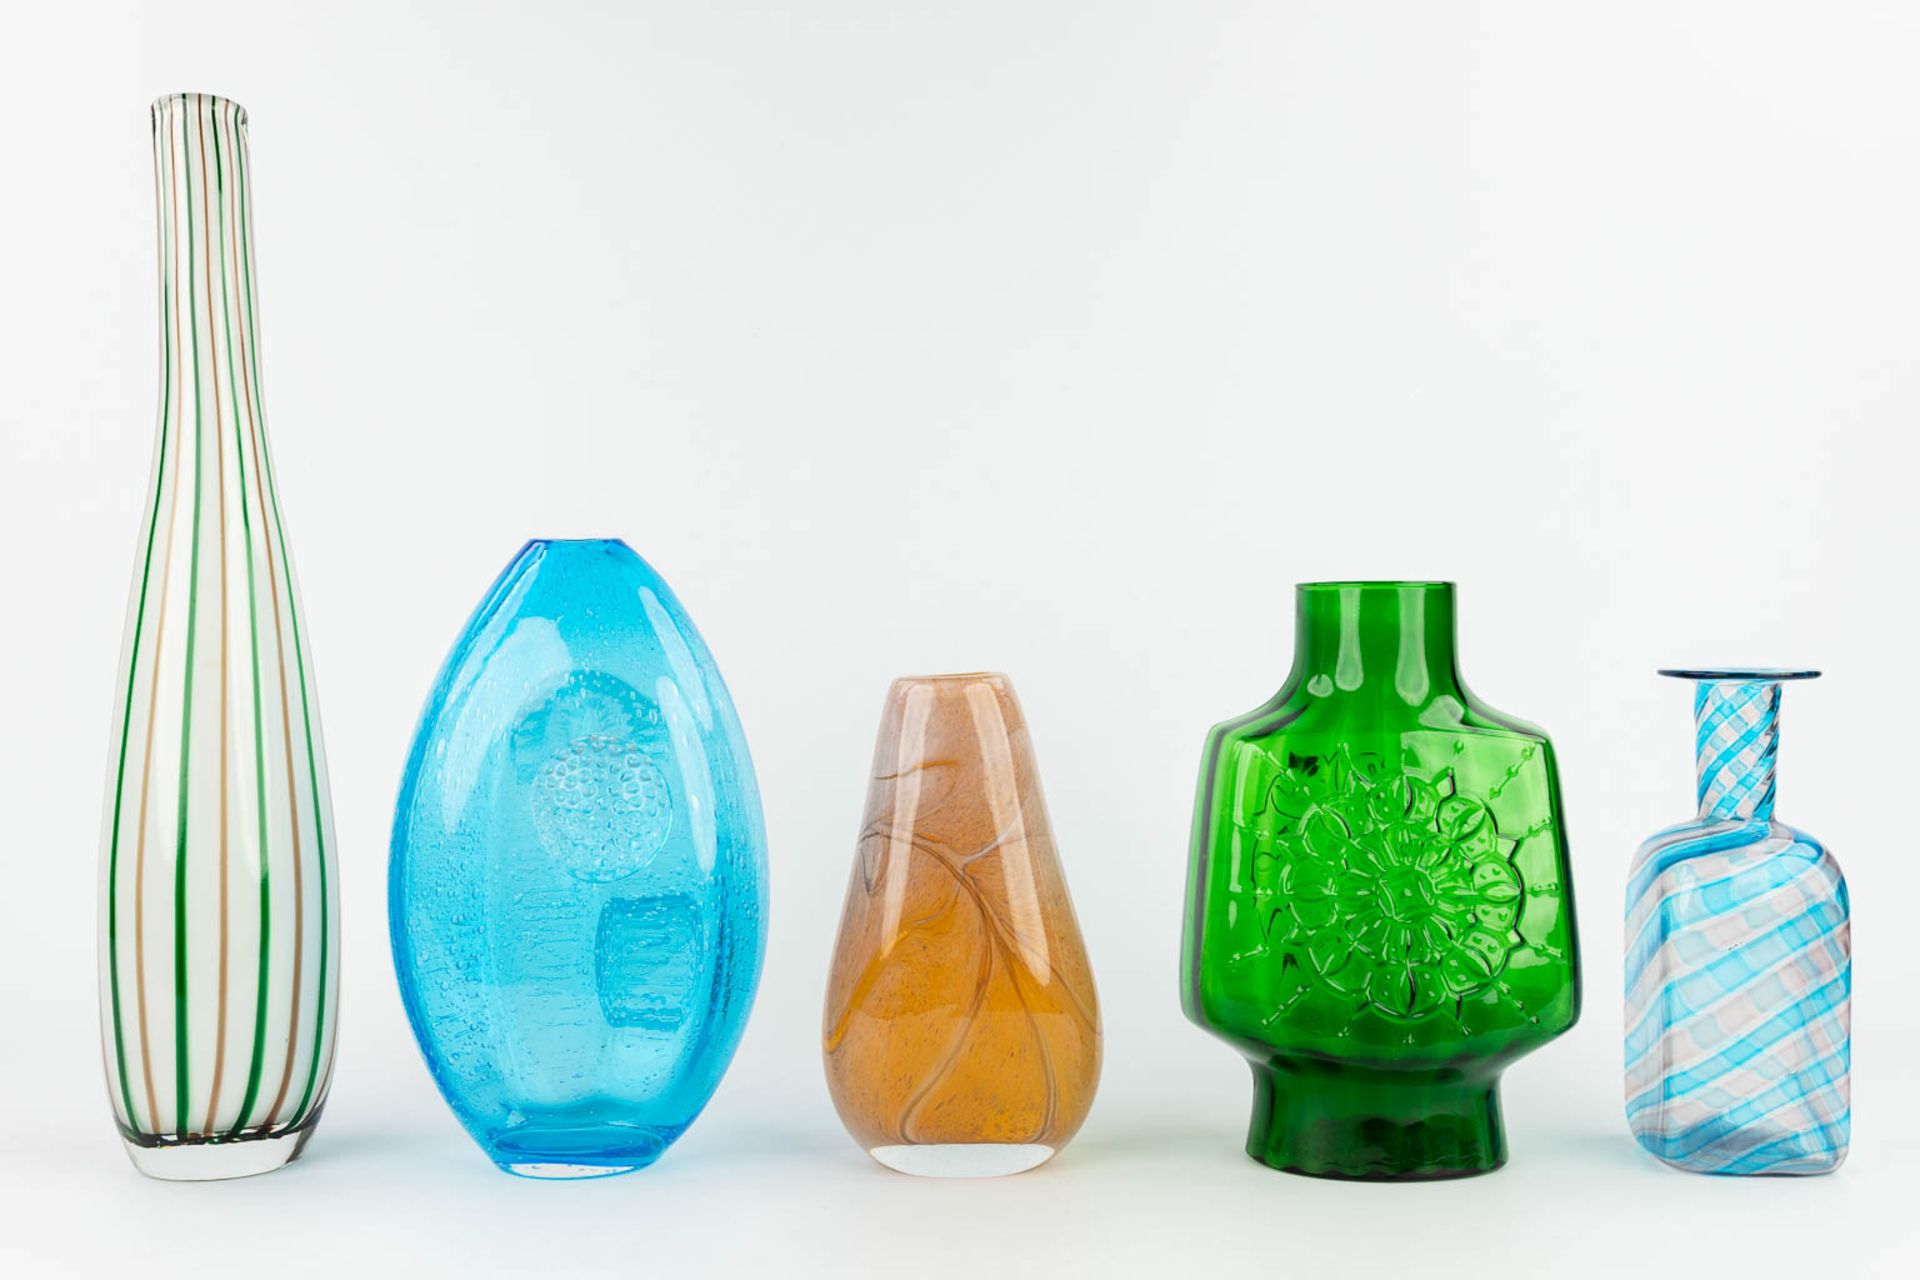 A collection of 5 glass vases, made in Murano, Italy and Scandinavia. (H: 45 x D: 10 cm) - Image 3 of 13